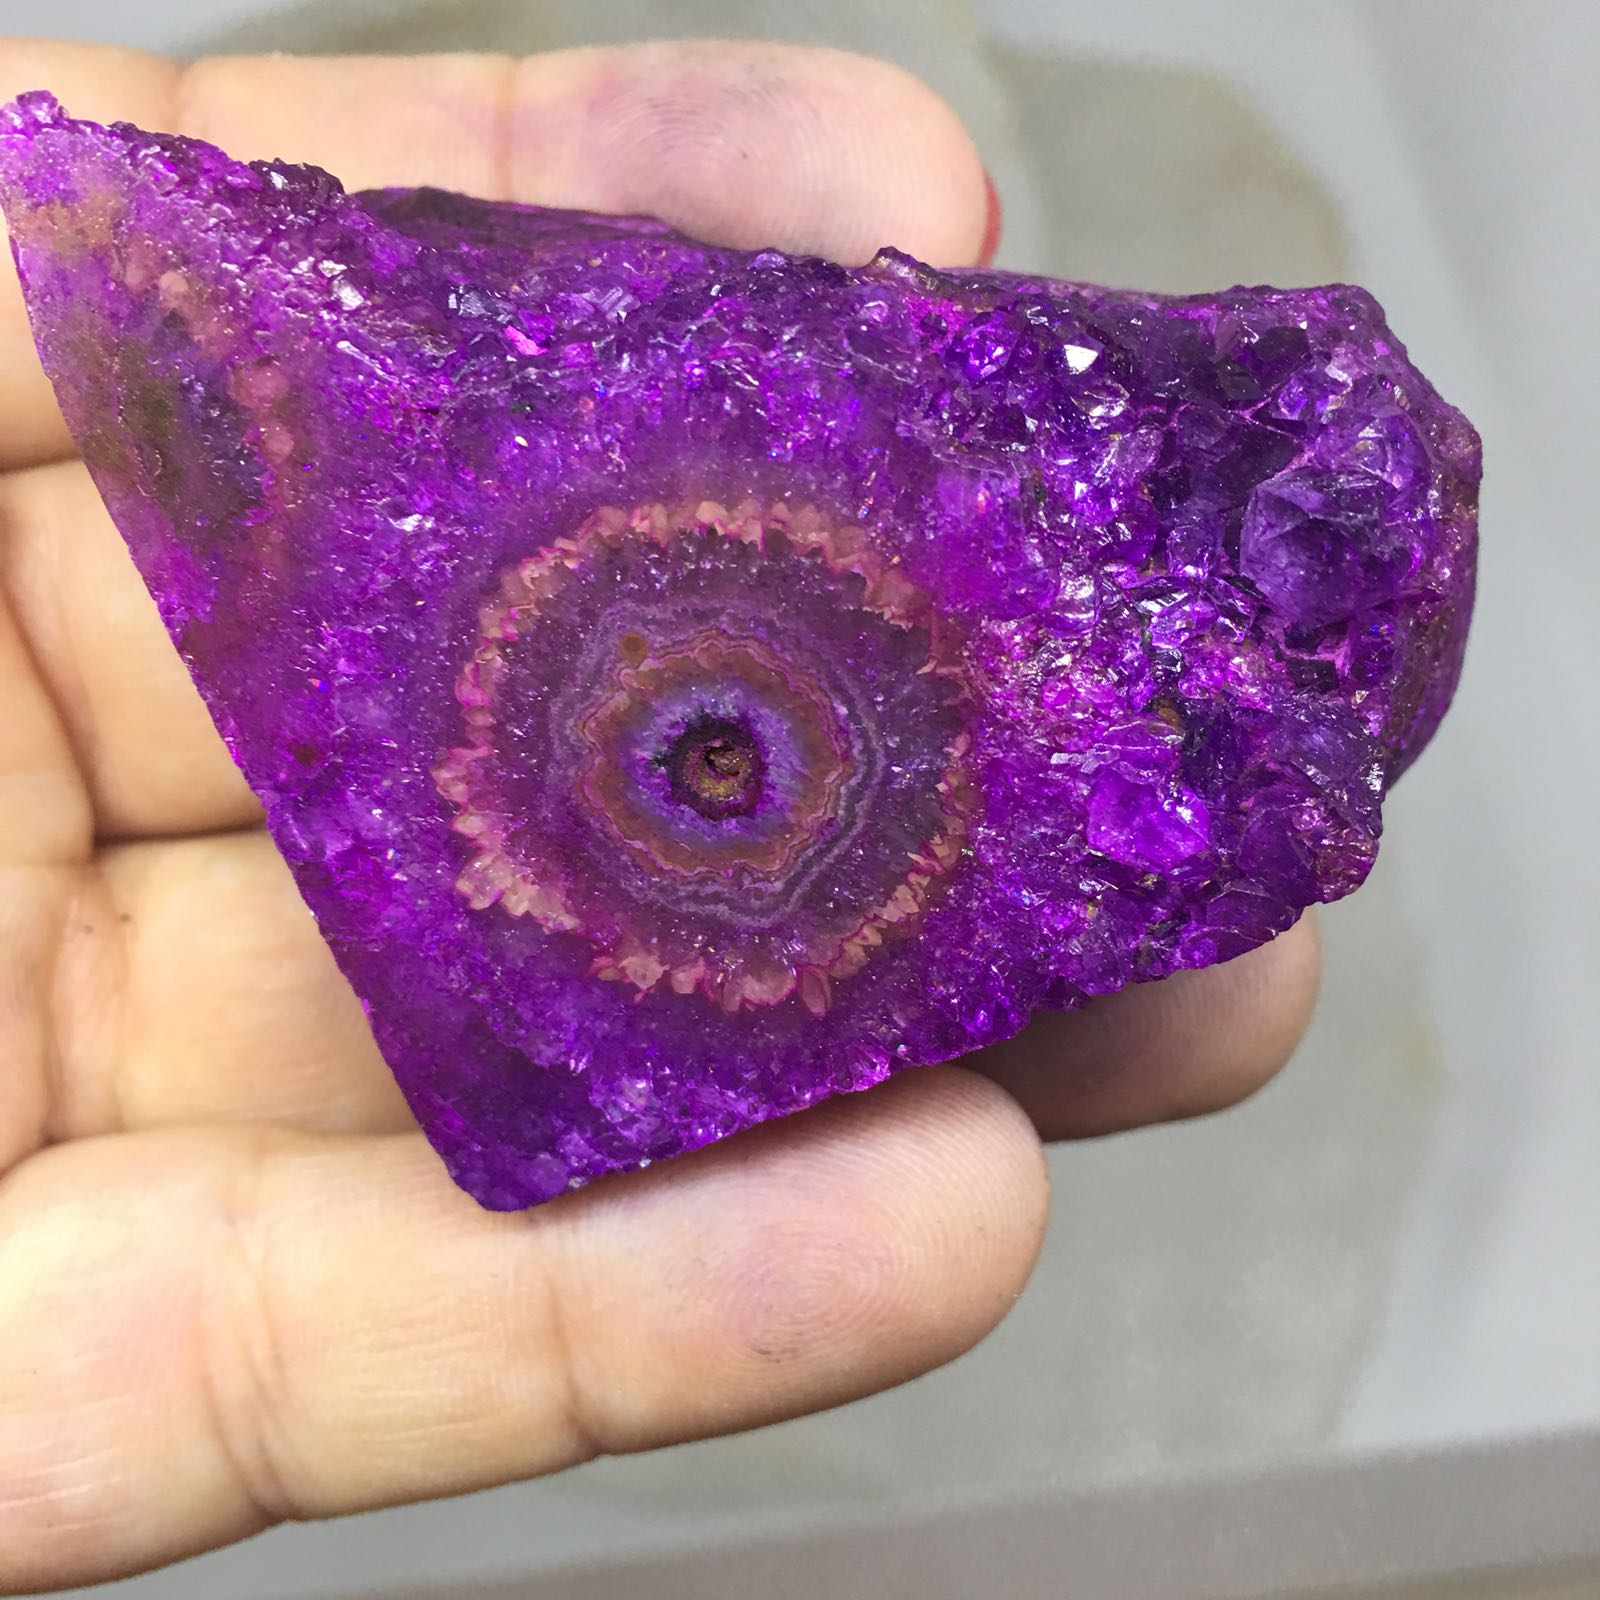 Stones from Uruguay - Pink Dyed Polished Amethyts Druzy Eye for Decor or Gift